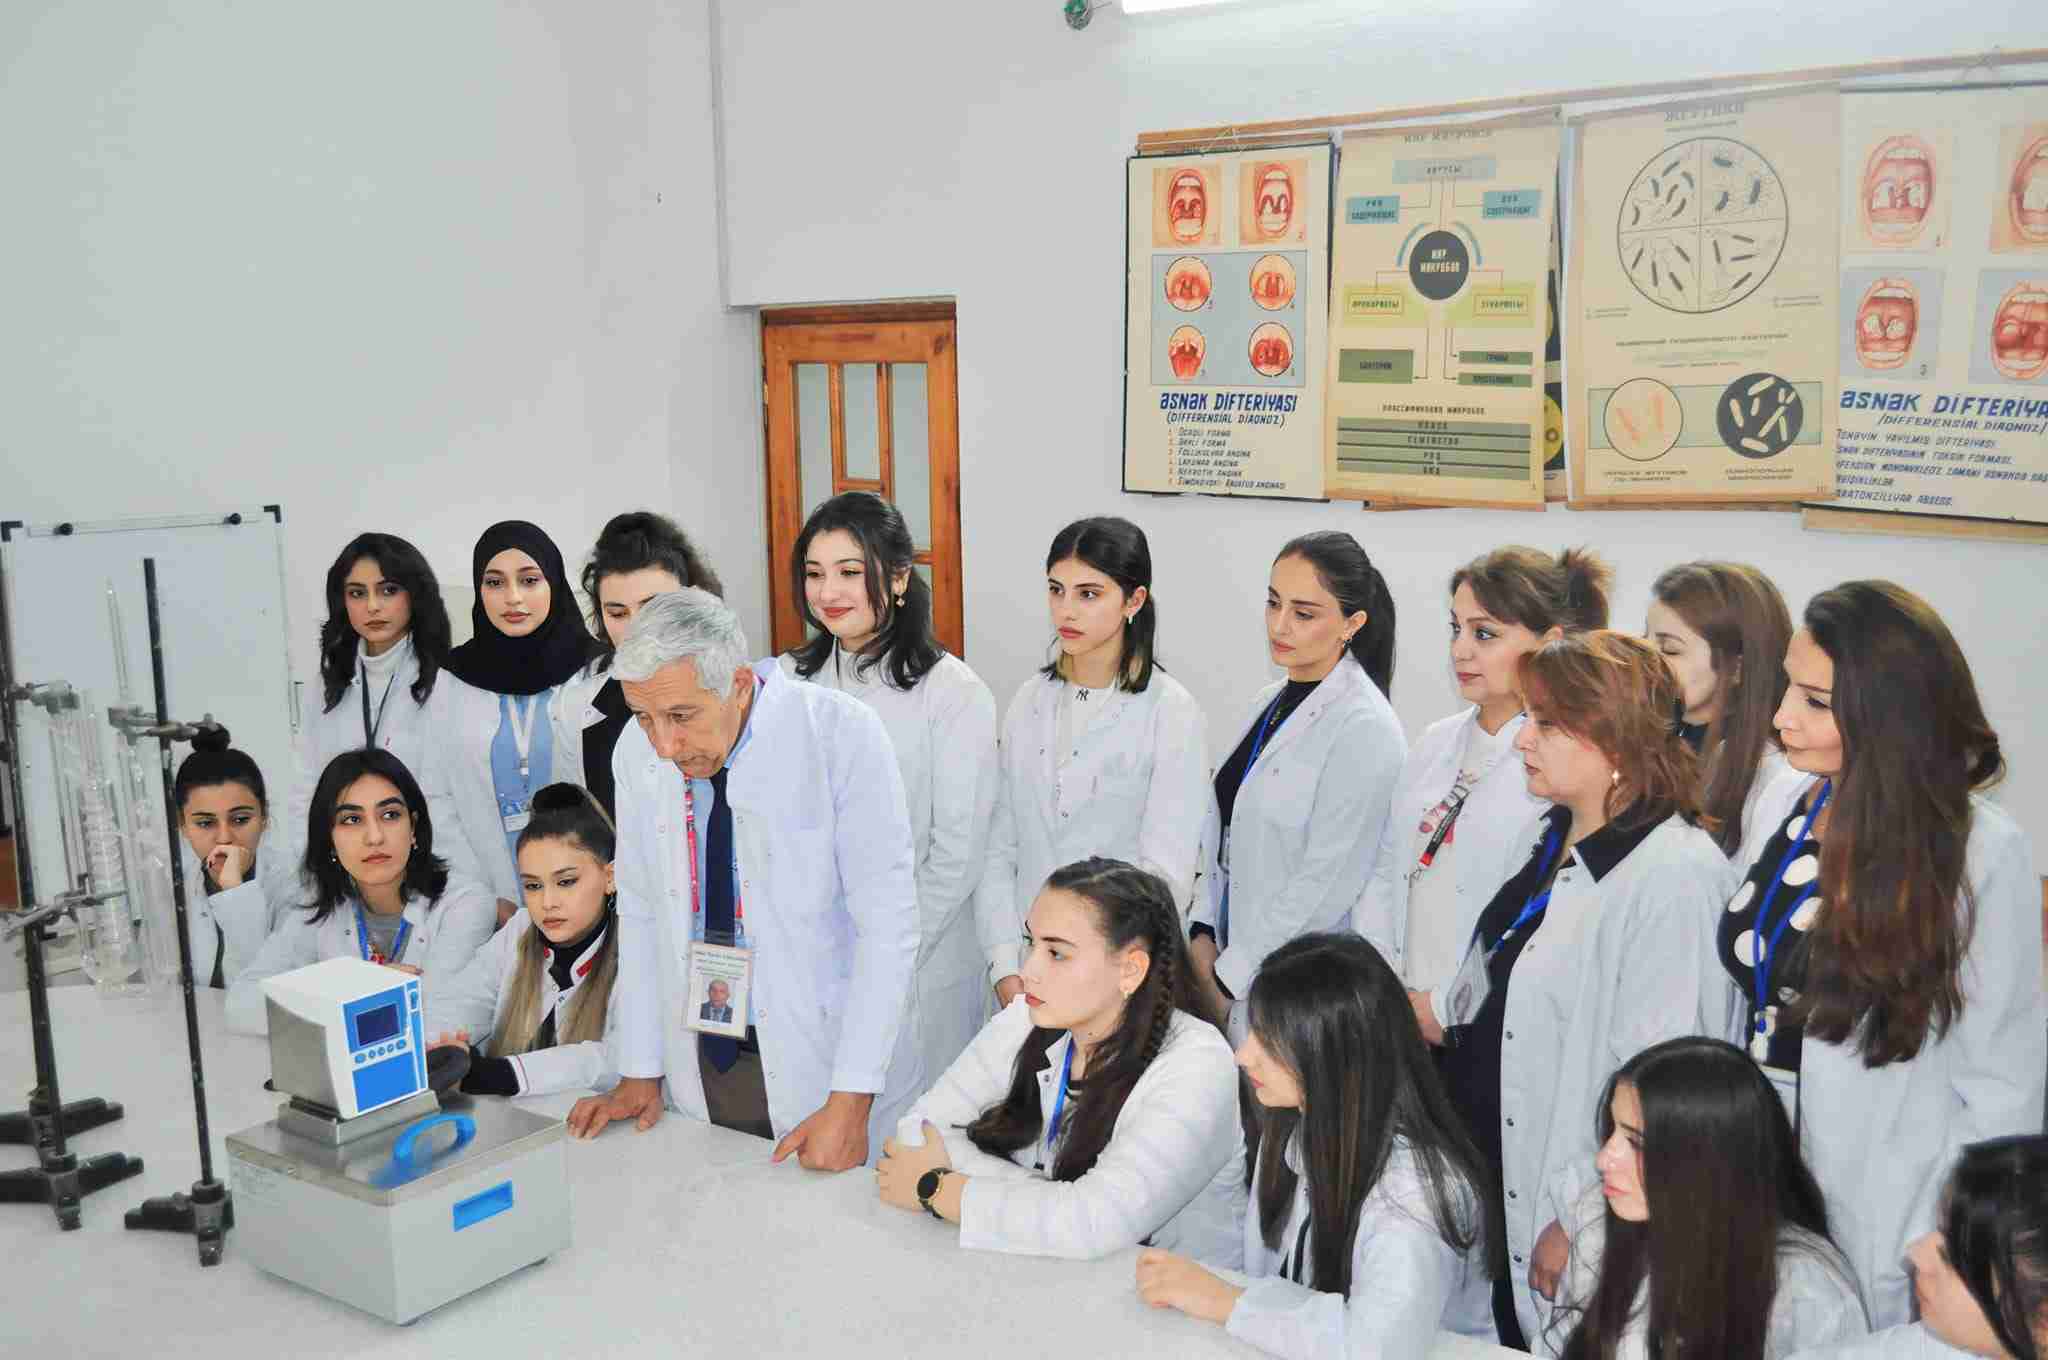 An open class of the Department of Biology and Ecology of OYU was held